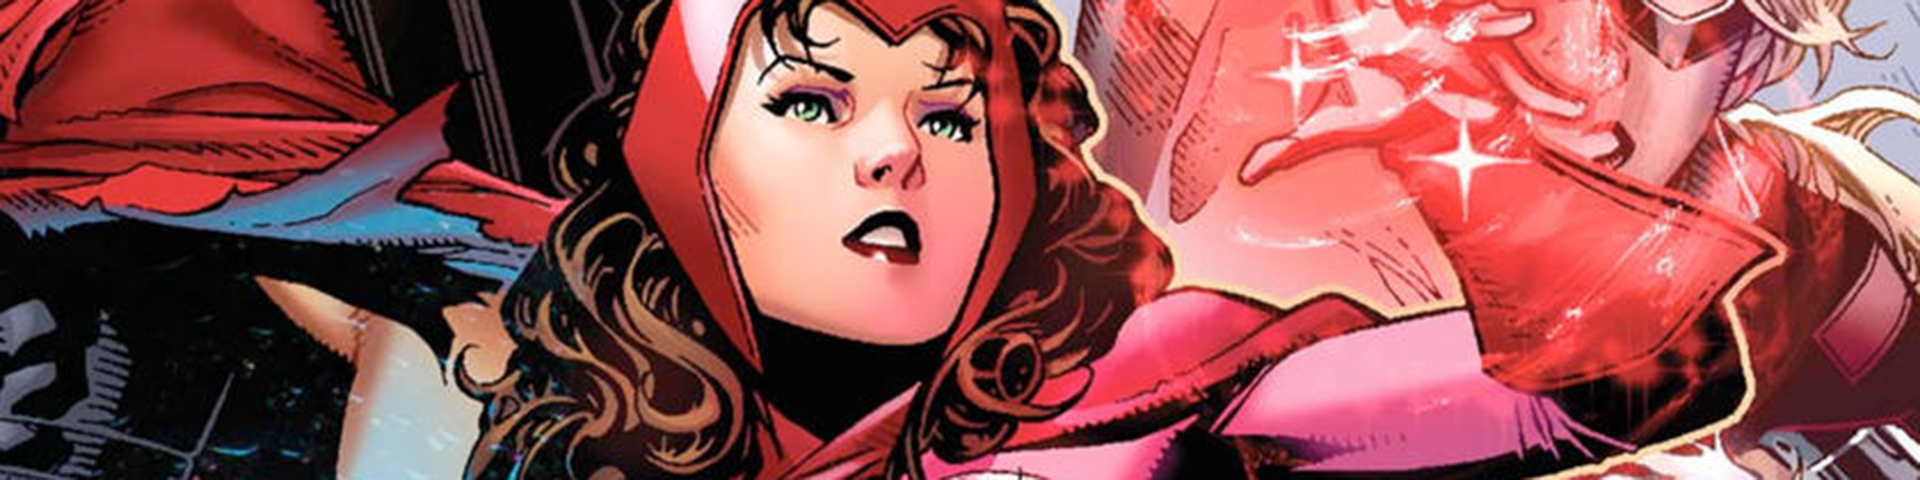 A close-up view of the Scarlet Witch, dressed in her signature red wardrobe.